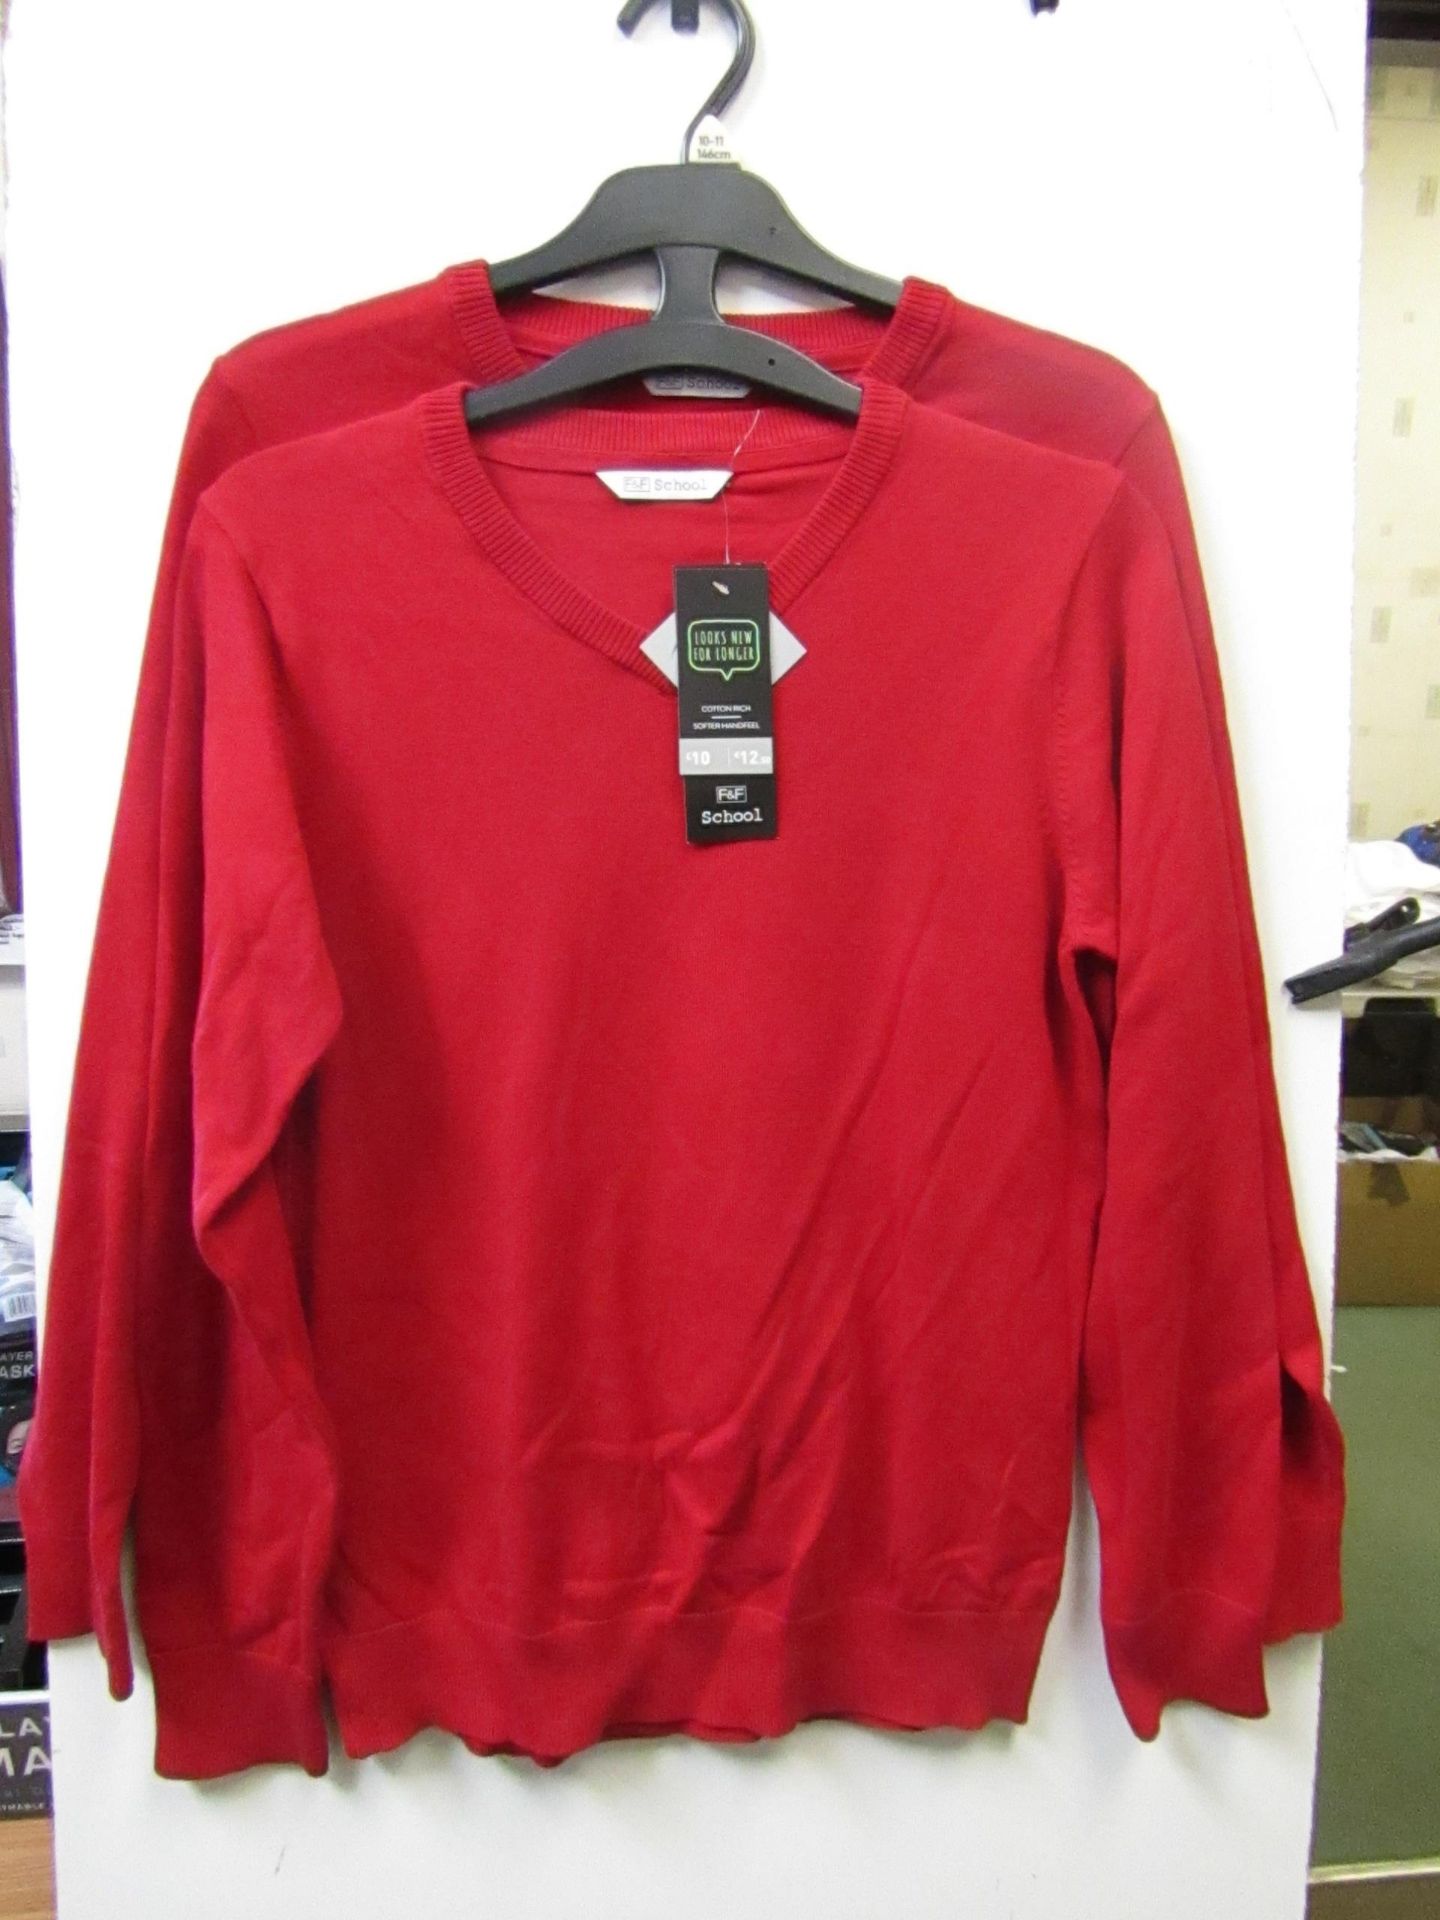 2x boys 2piece school jumper red - size 10/11 - new but might have security tags on.